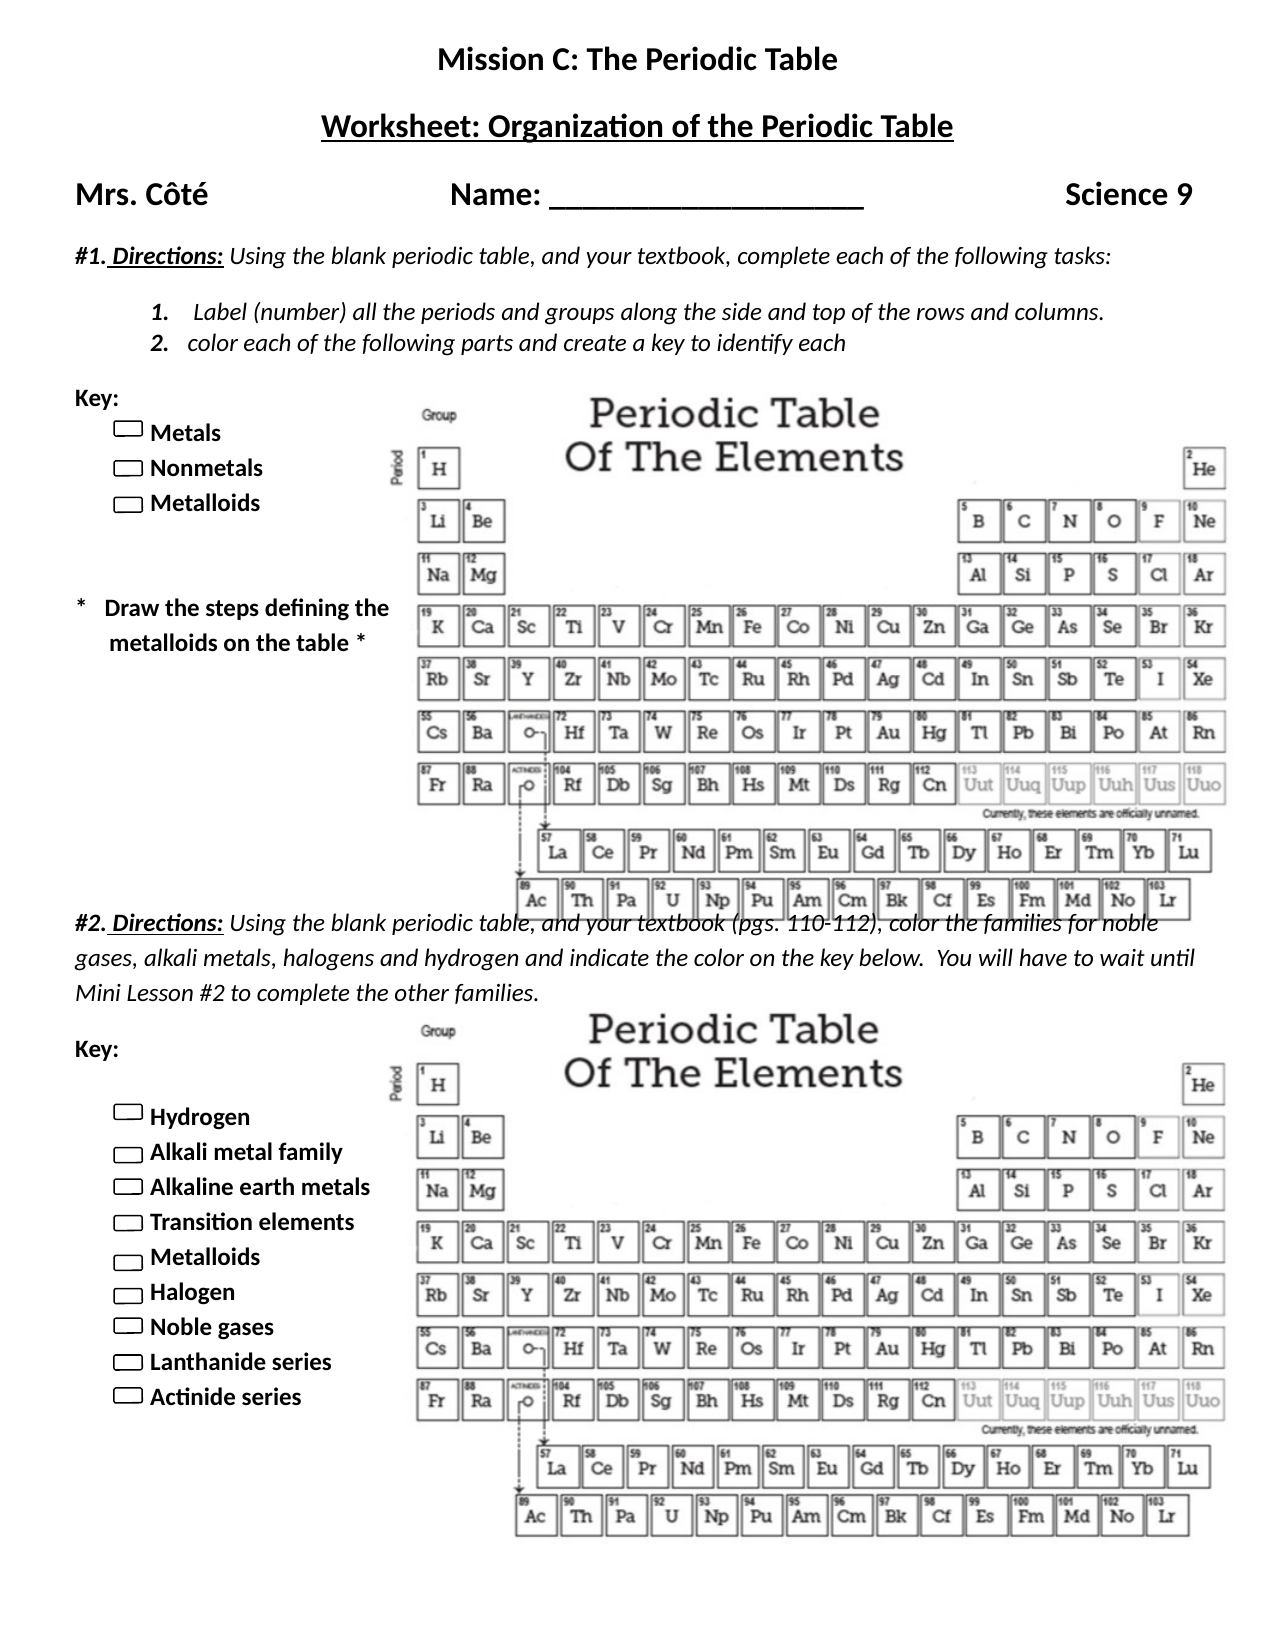 Mission C: The Periodic Table Worksheet: Organization of the With Blank Periodic Table Worksheet